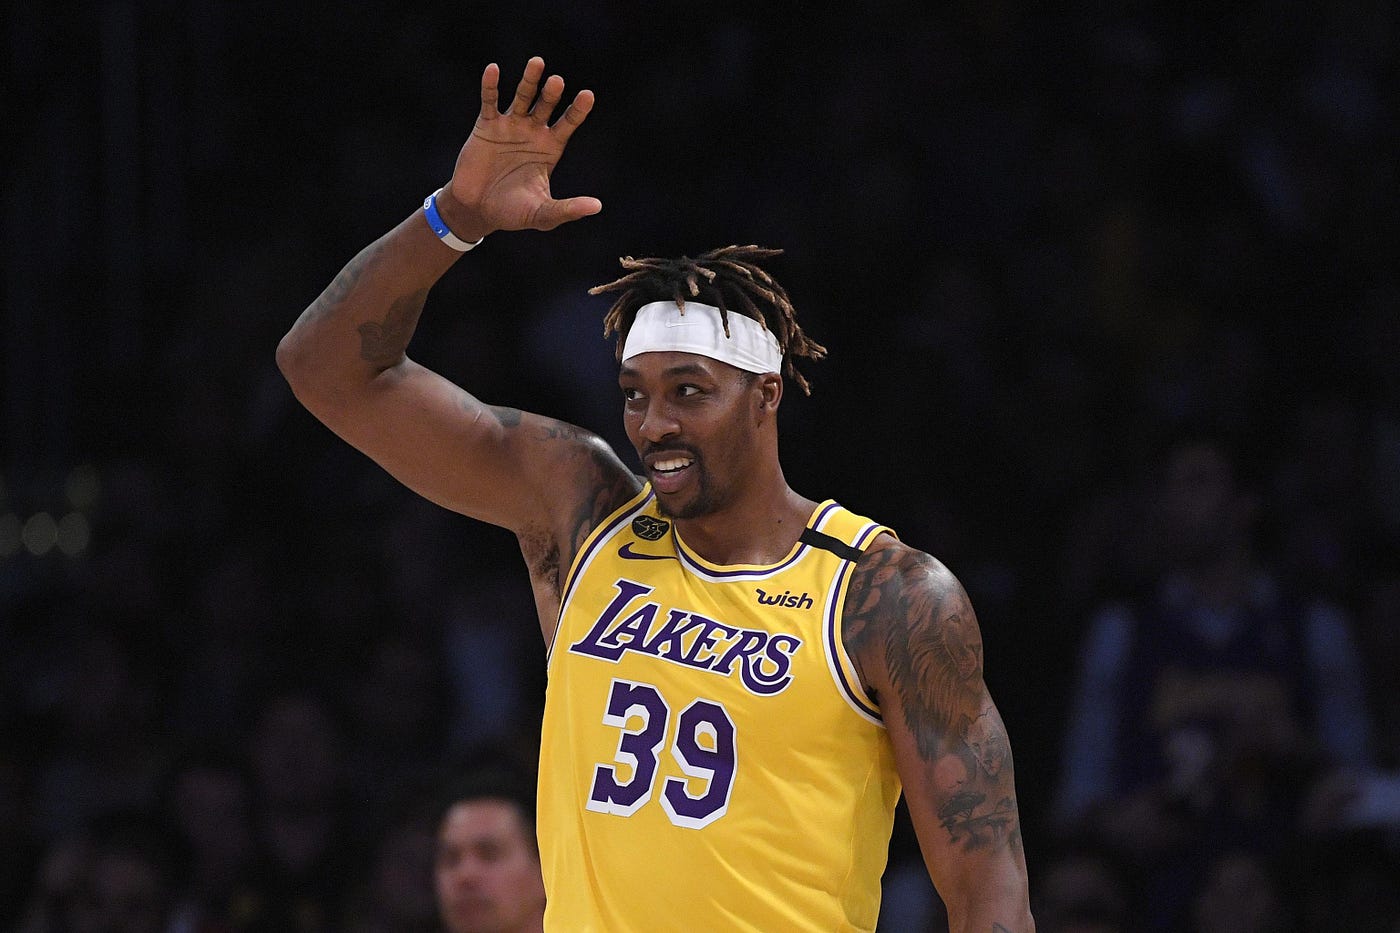 Why is the Dwight Howard's Lakers jersey so rare?